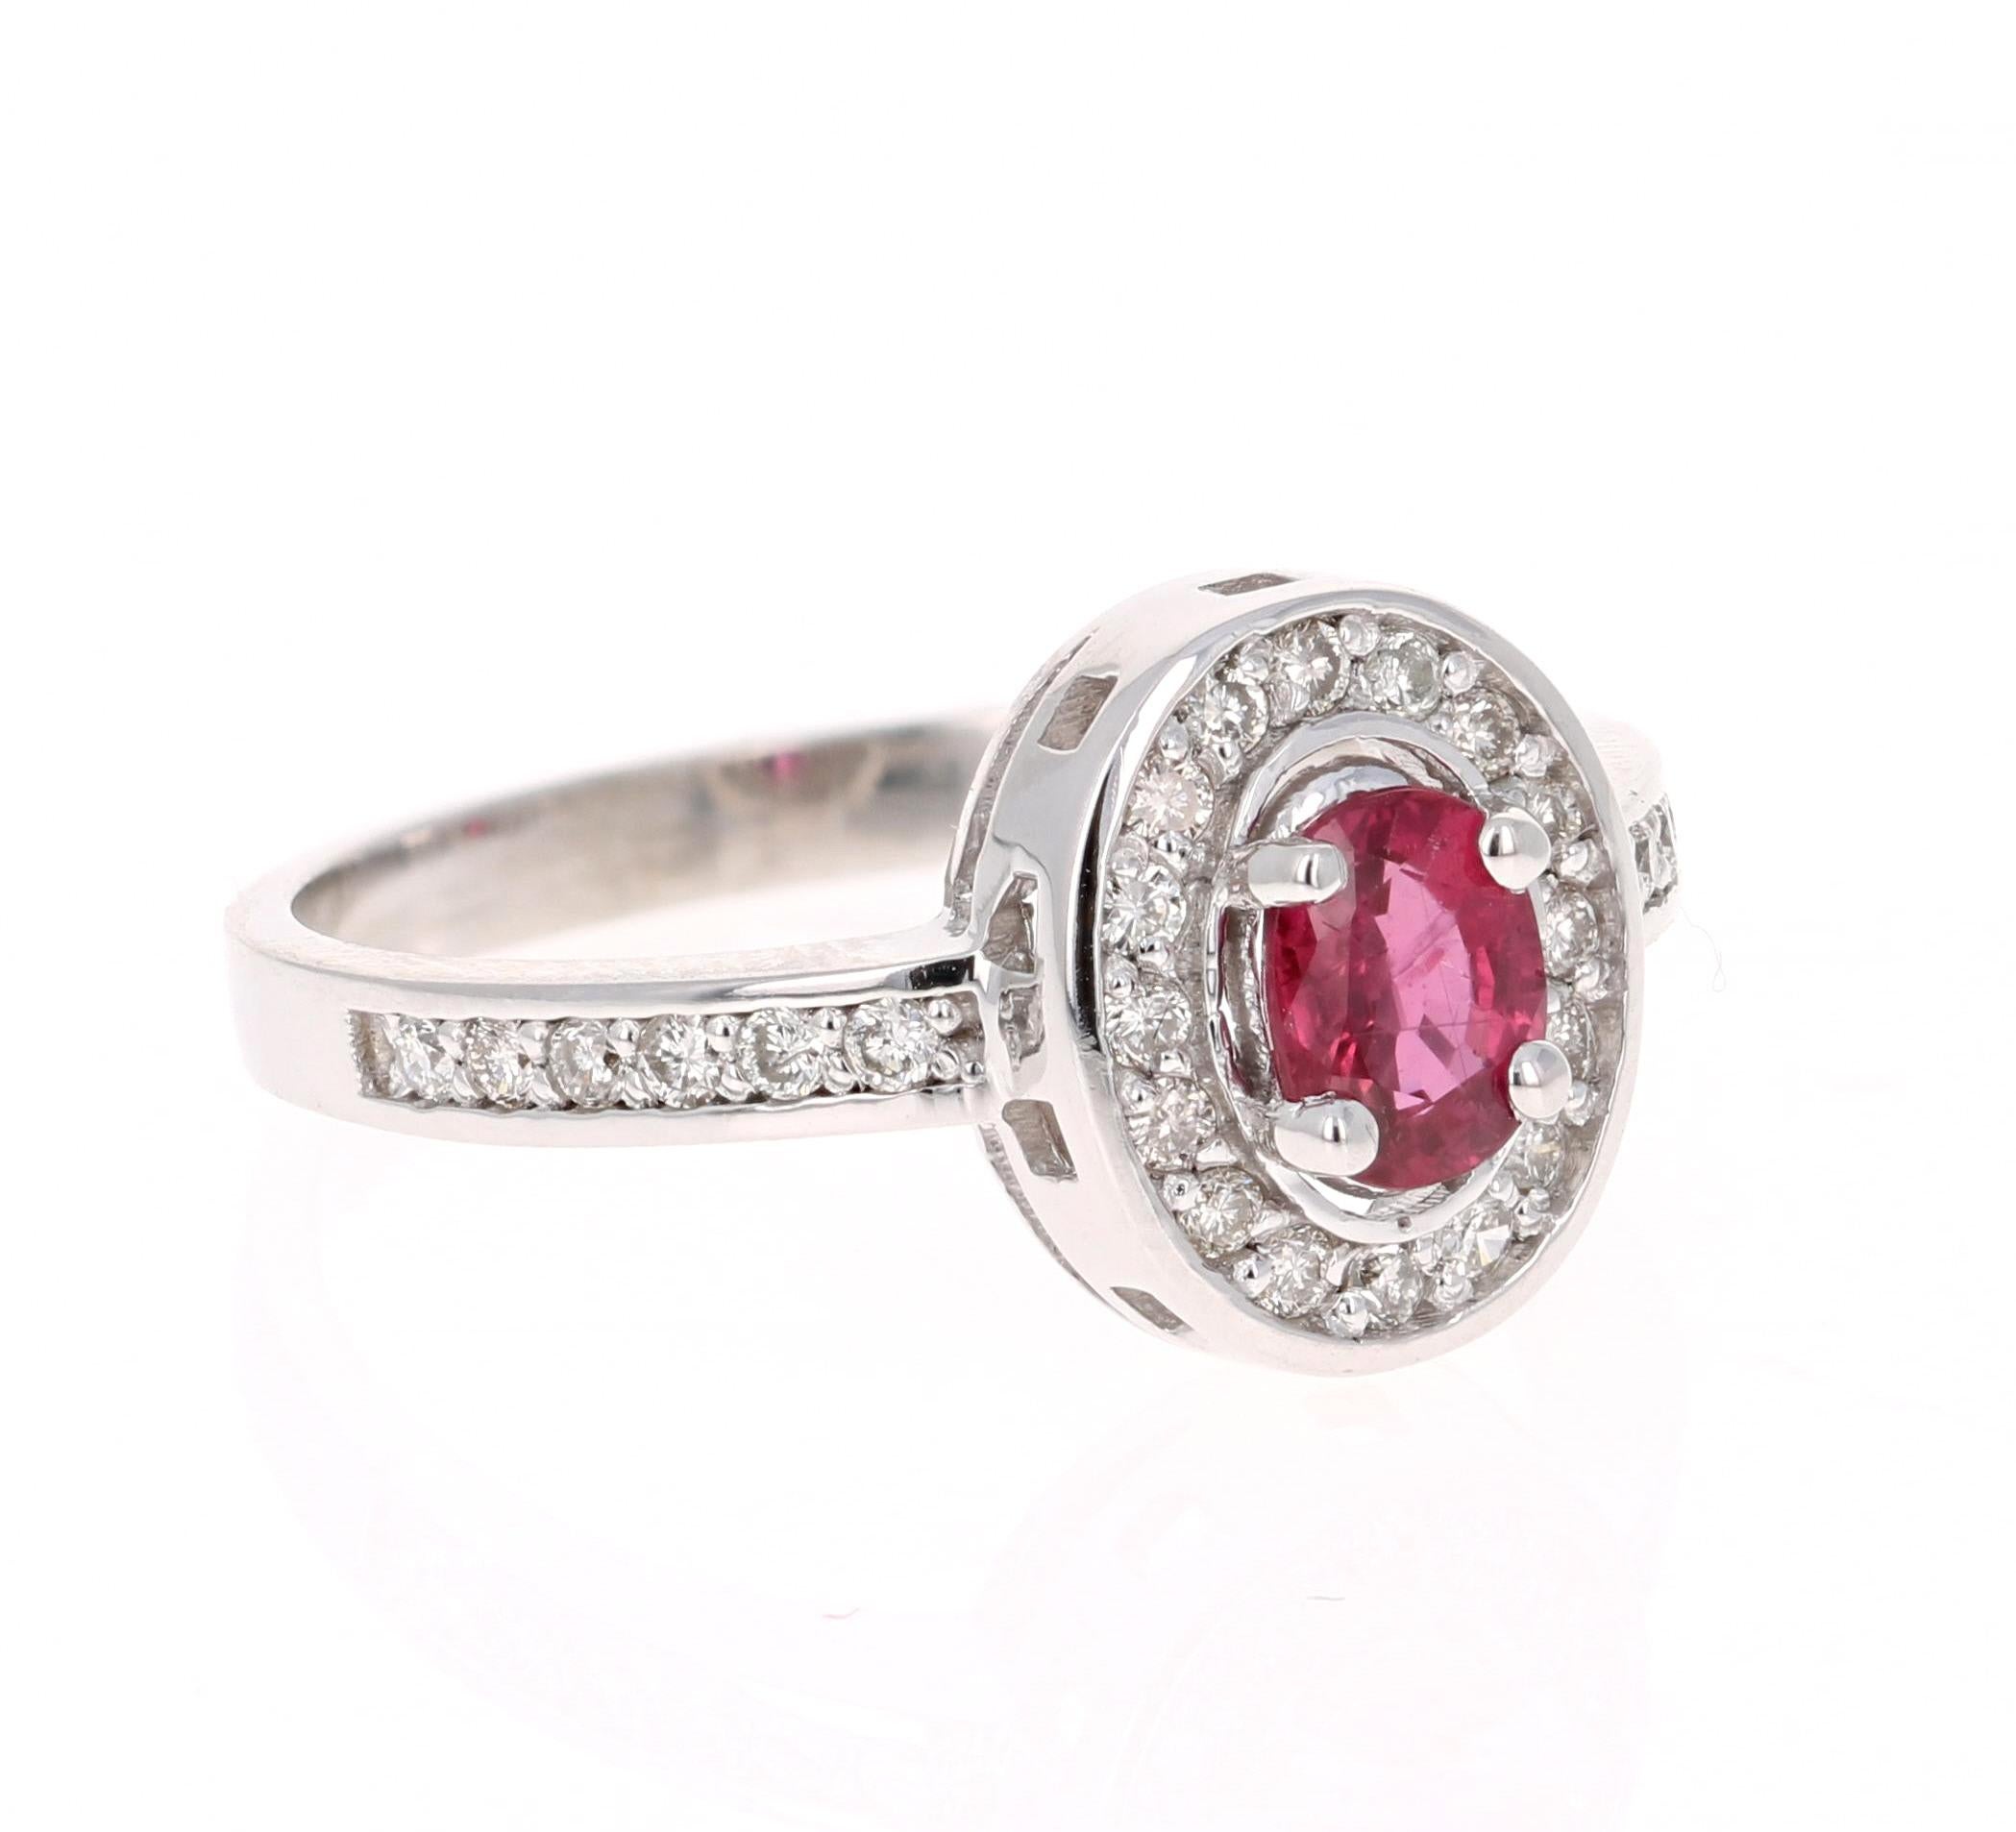 Simply beautiful Ruby Diamond Ring with a Oval Cut 0.59 Carat Burmese Ruby which is surrounded by 28 Round Cut Diamonds that weigh 0.31 carats. The total carat weight of the ring is 1.23 carats. The clarity and color of the diamonds are VS/H.

The